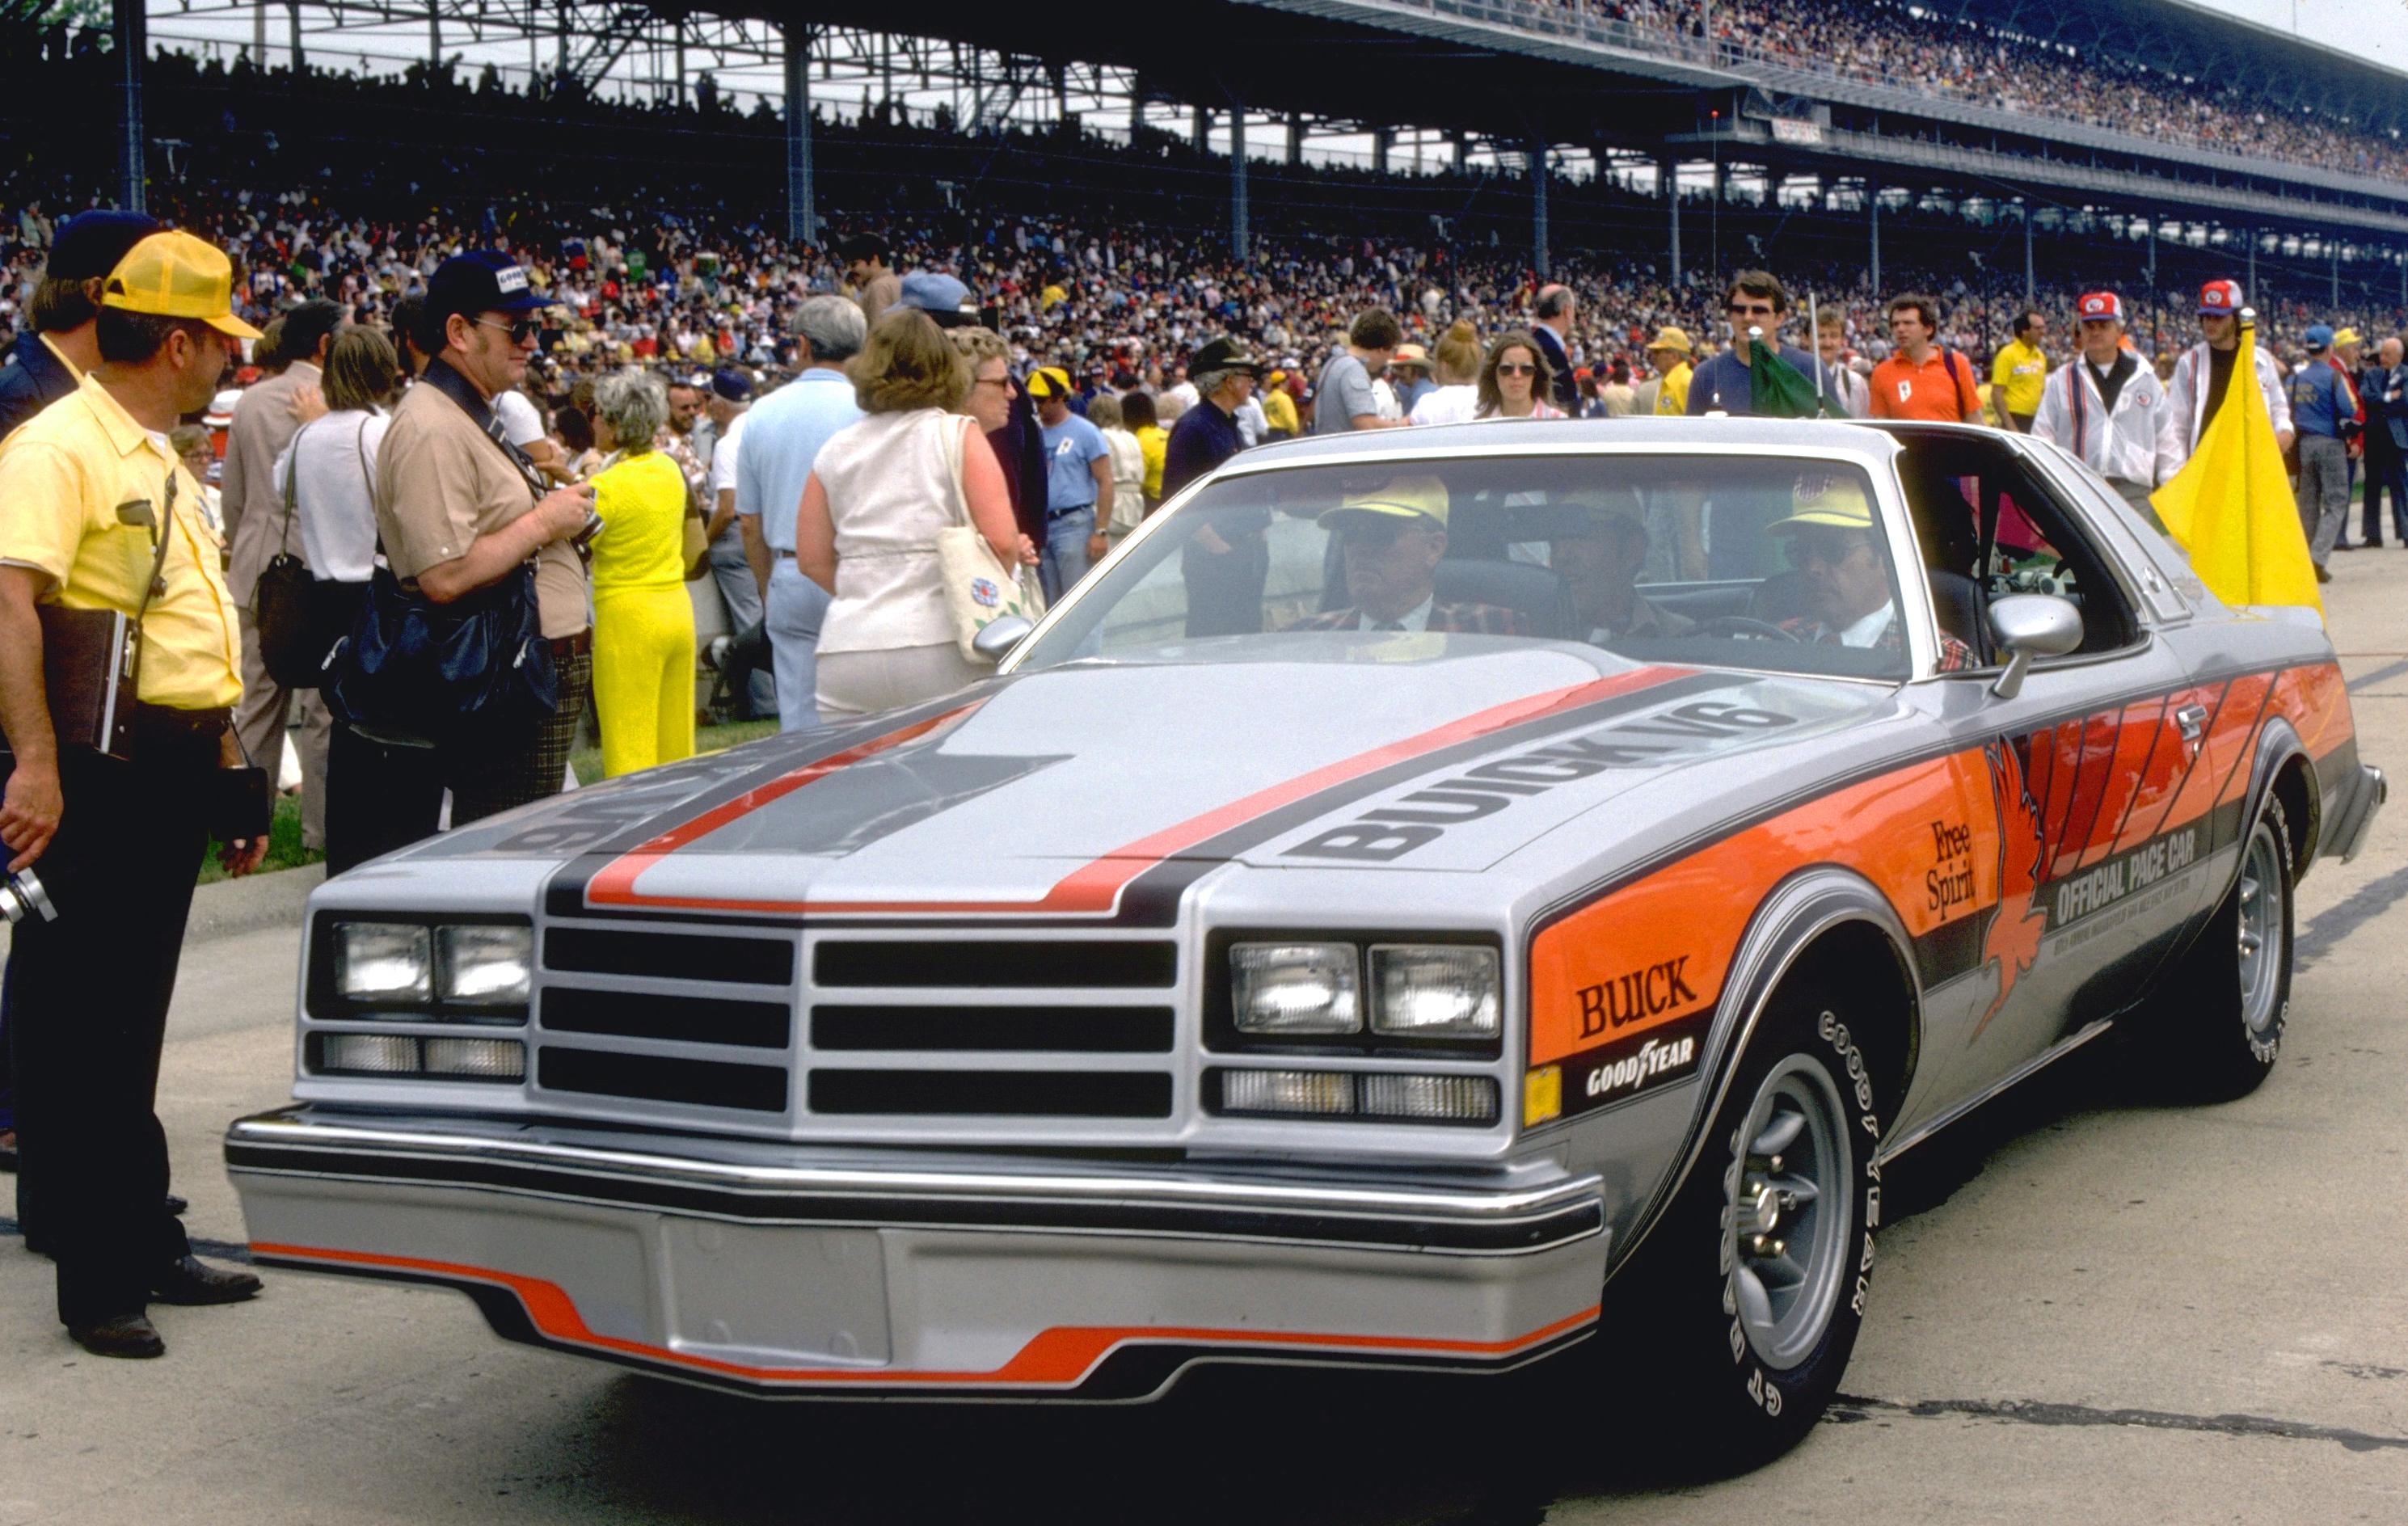 Buick’s turbocharging legacy got its start with the 1976 Century modified to pace the Indianapolis 500 that year. | Buick photo